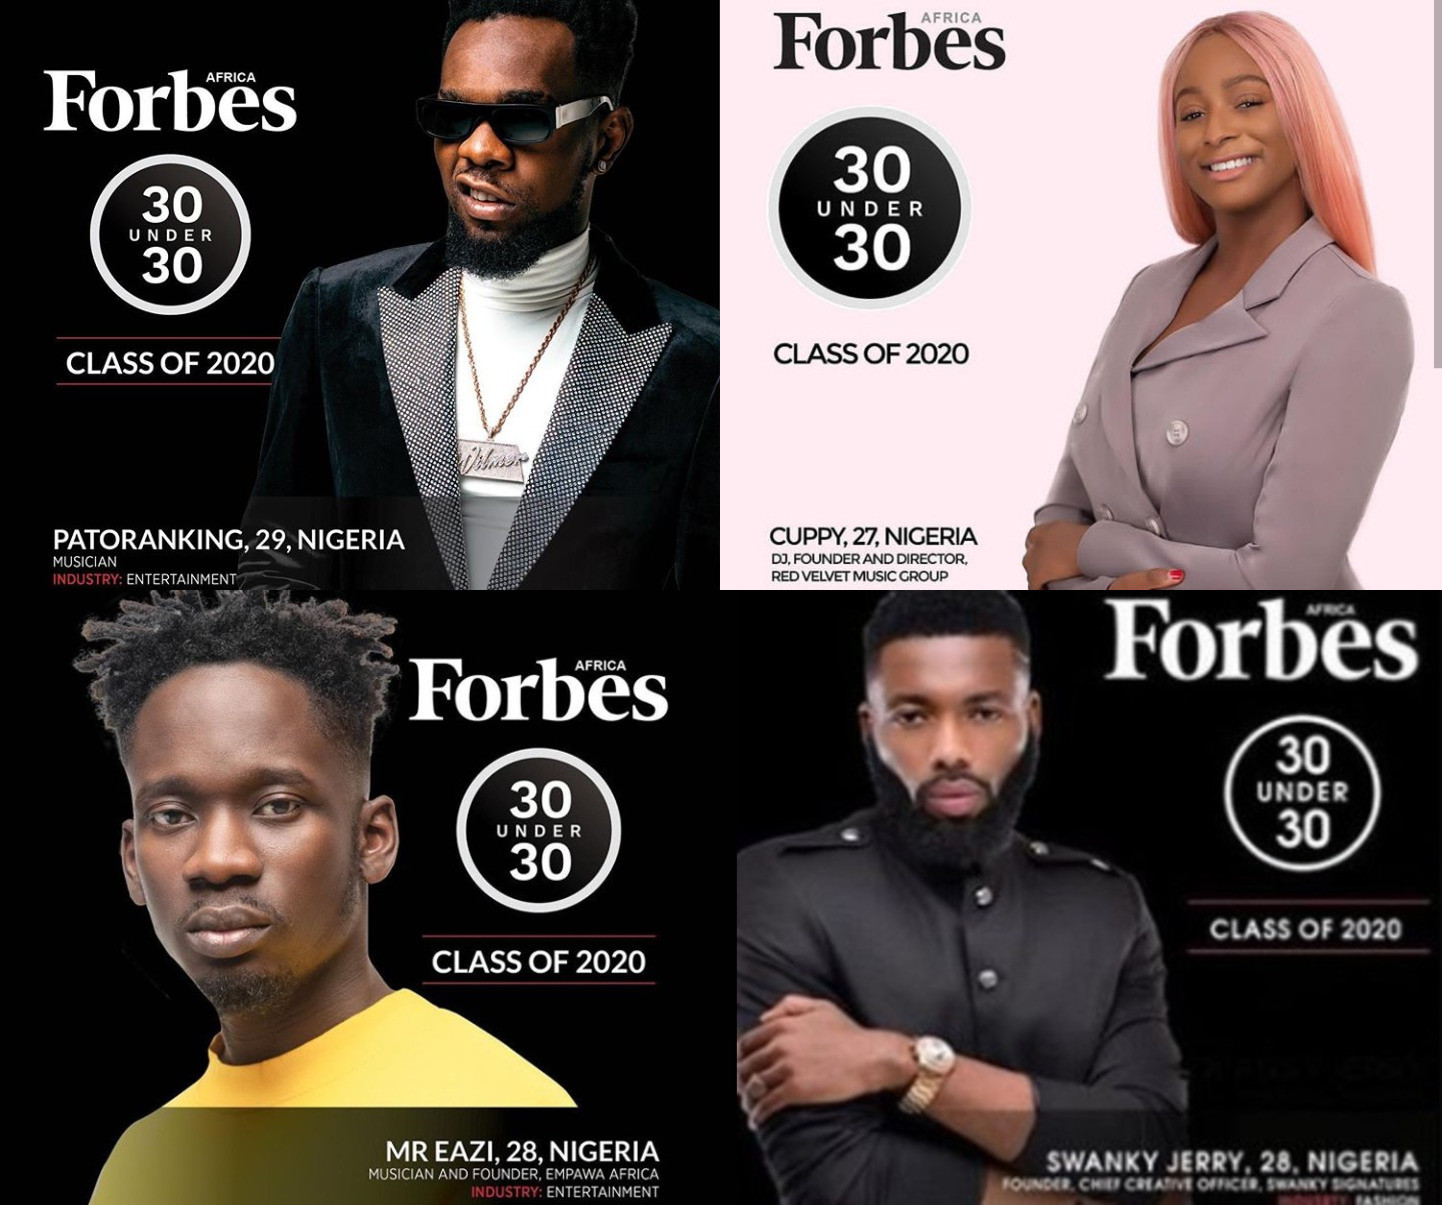 "What a Bulshit list" Huddah Monroe dismisses Forbes Africa 30 under 30 list consisting of DJ Cuppy, Swanky Jerry, Patoranking and Mr Eazi